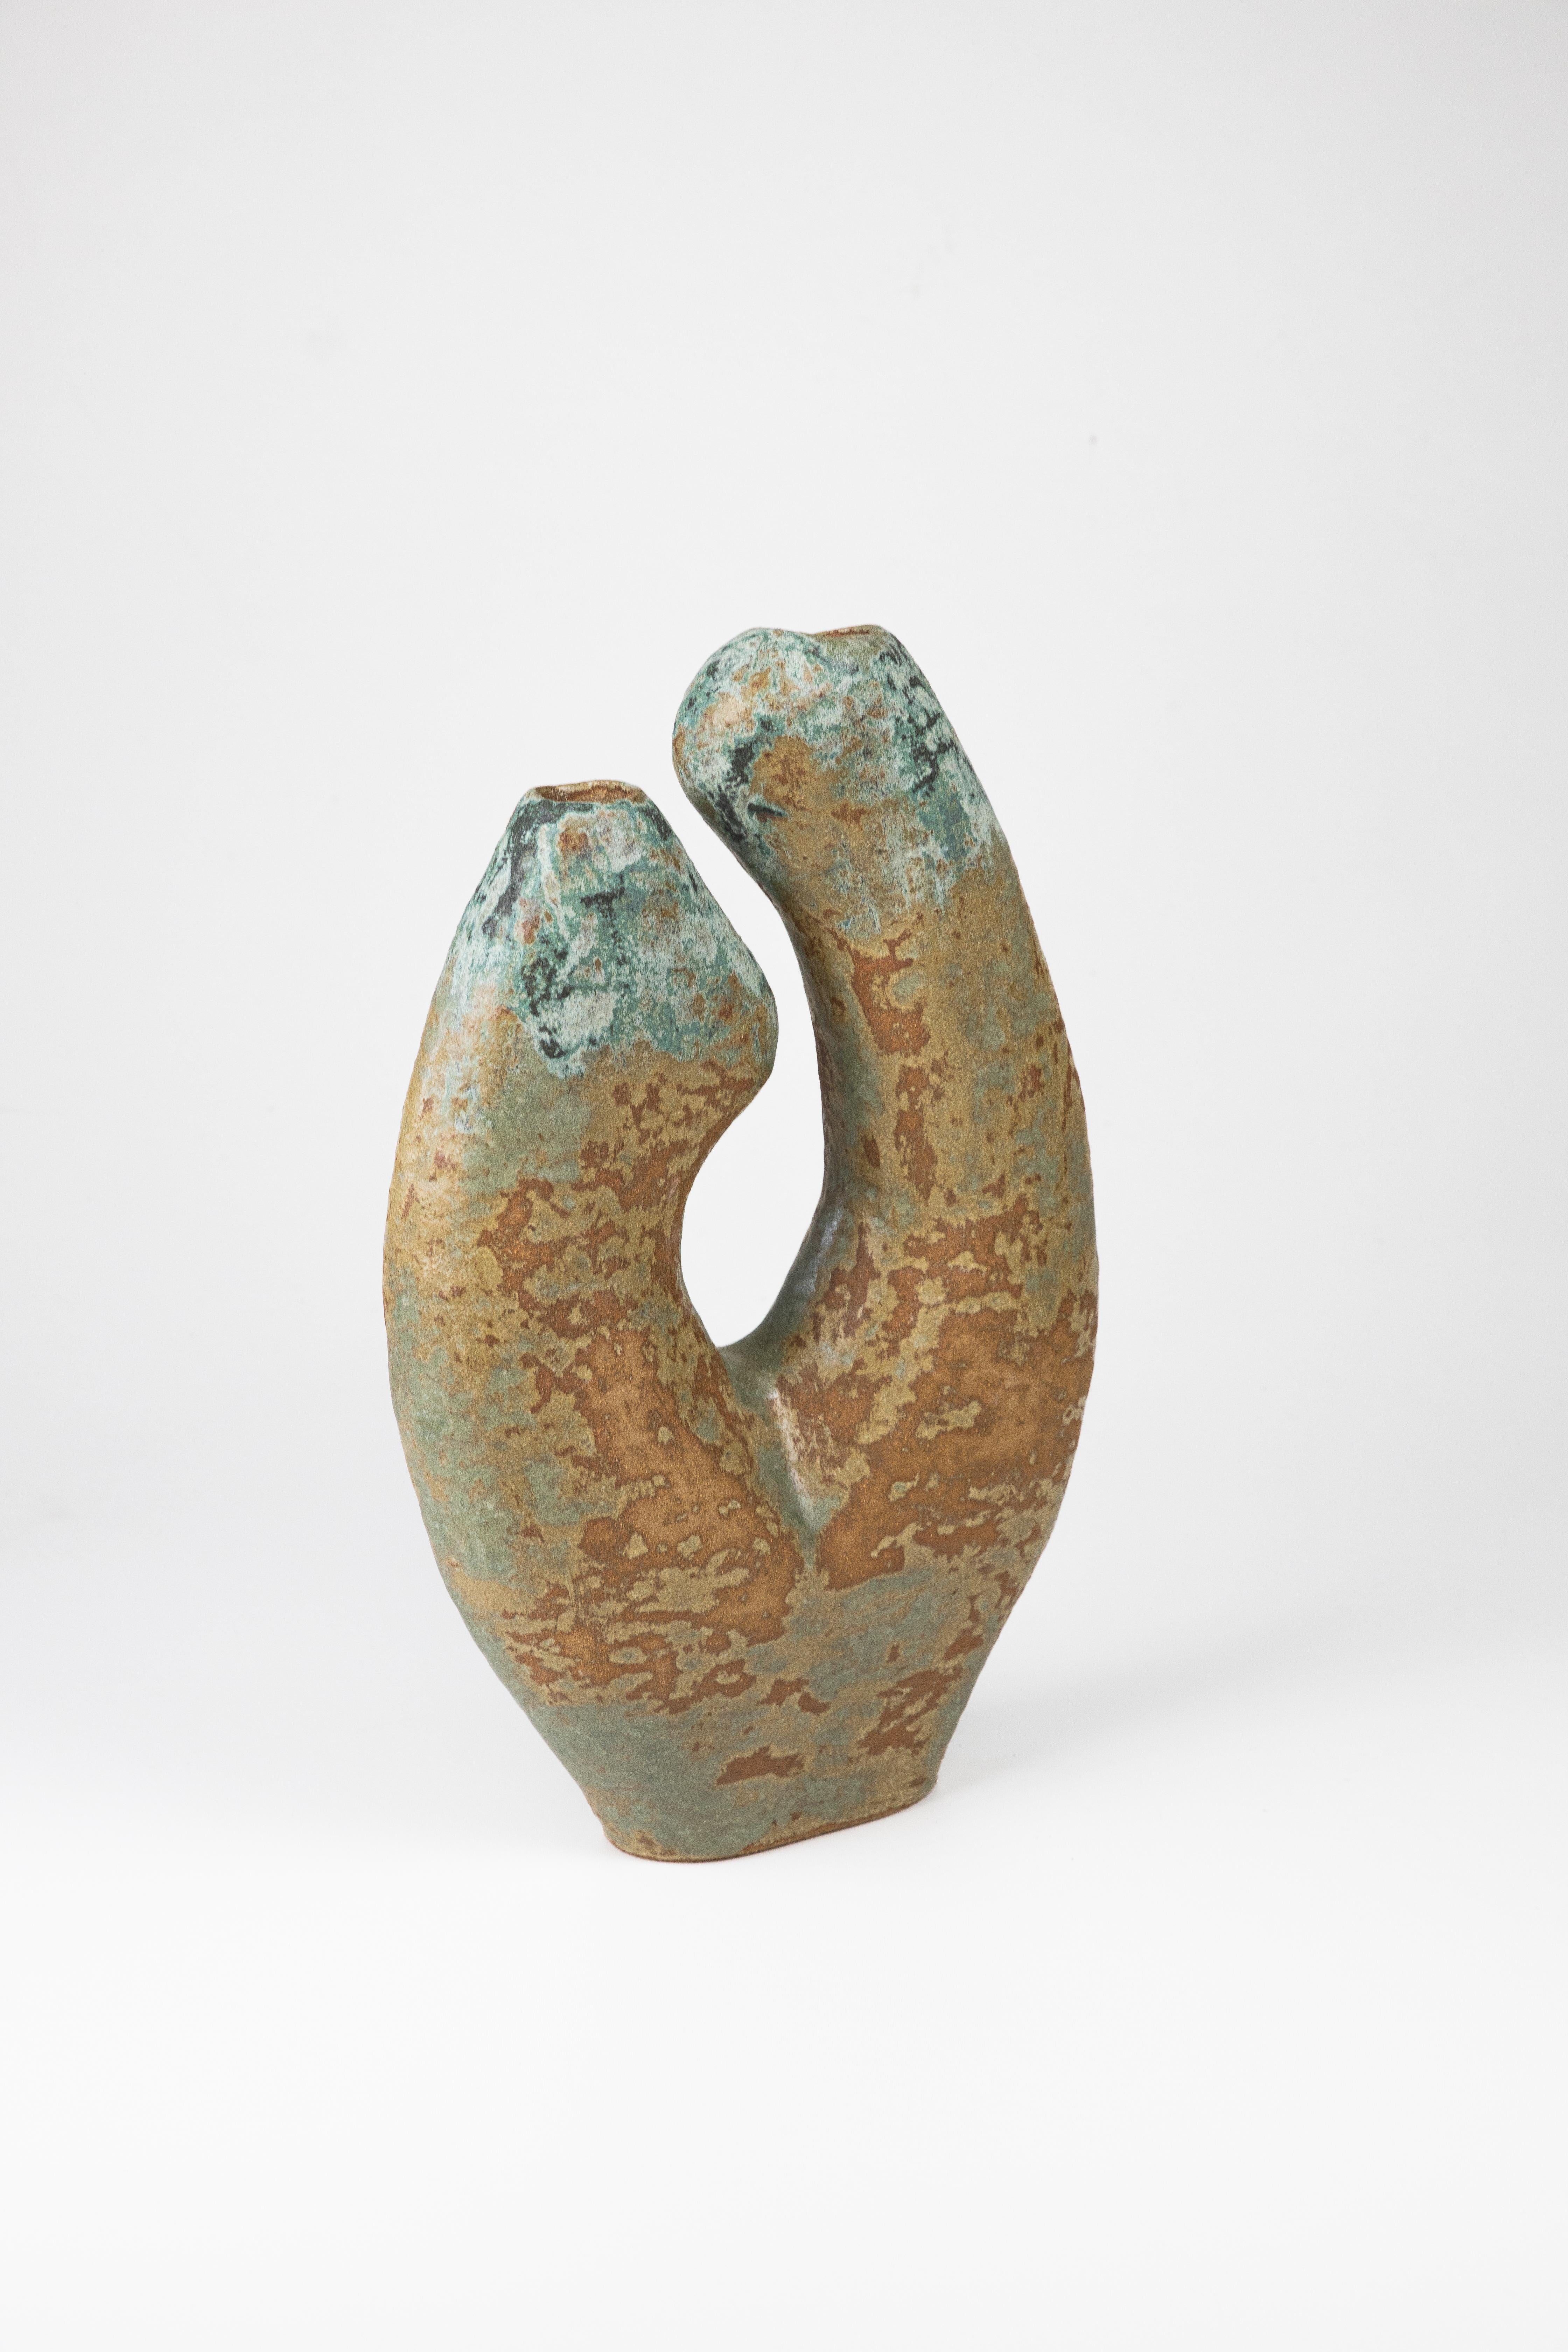 Ole Victor is a Danish artist who attended Art Academy between 1975 and 1980. He creates artworks and ceramics ever since. He’s been exhibited in Galerie 26 on Champs-Élysées and some of Denmark’s finest exhibitions.
Ole Victor's sculptures are